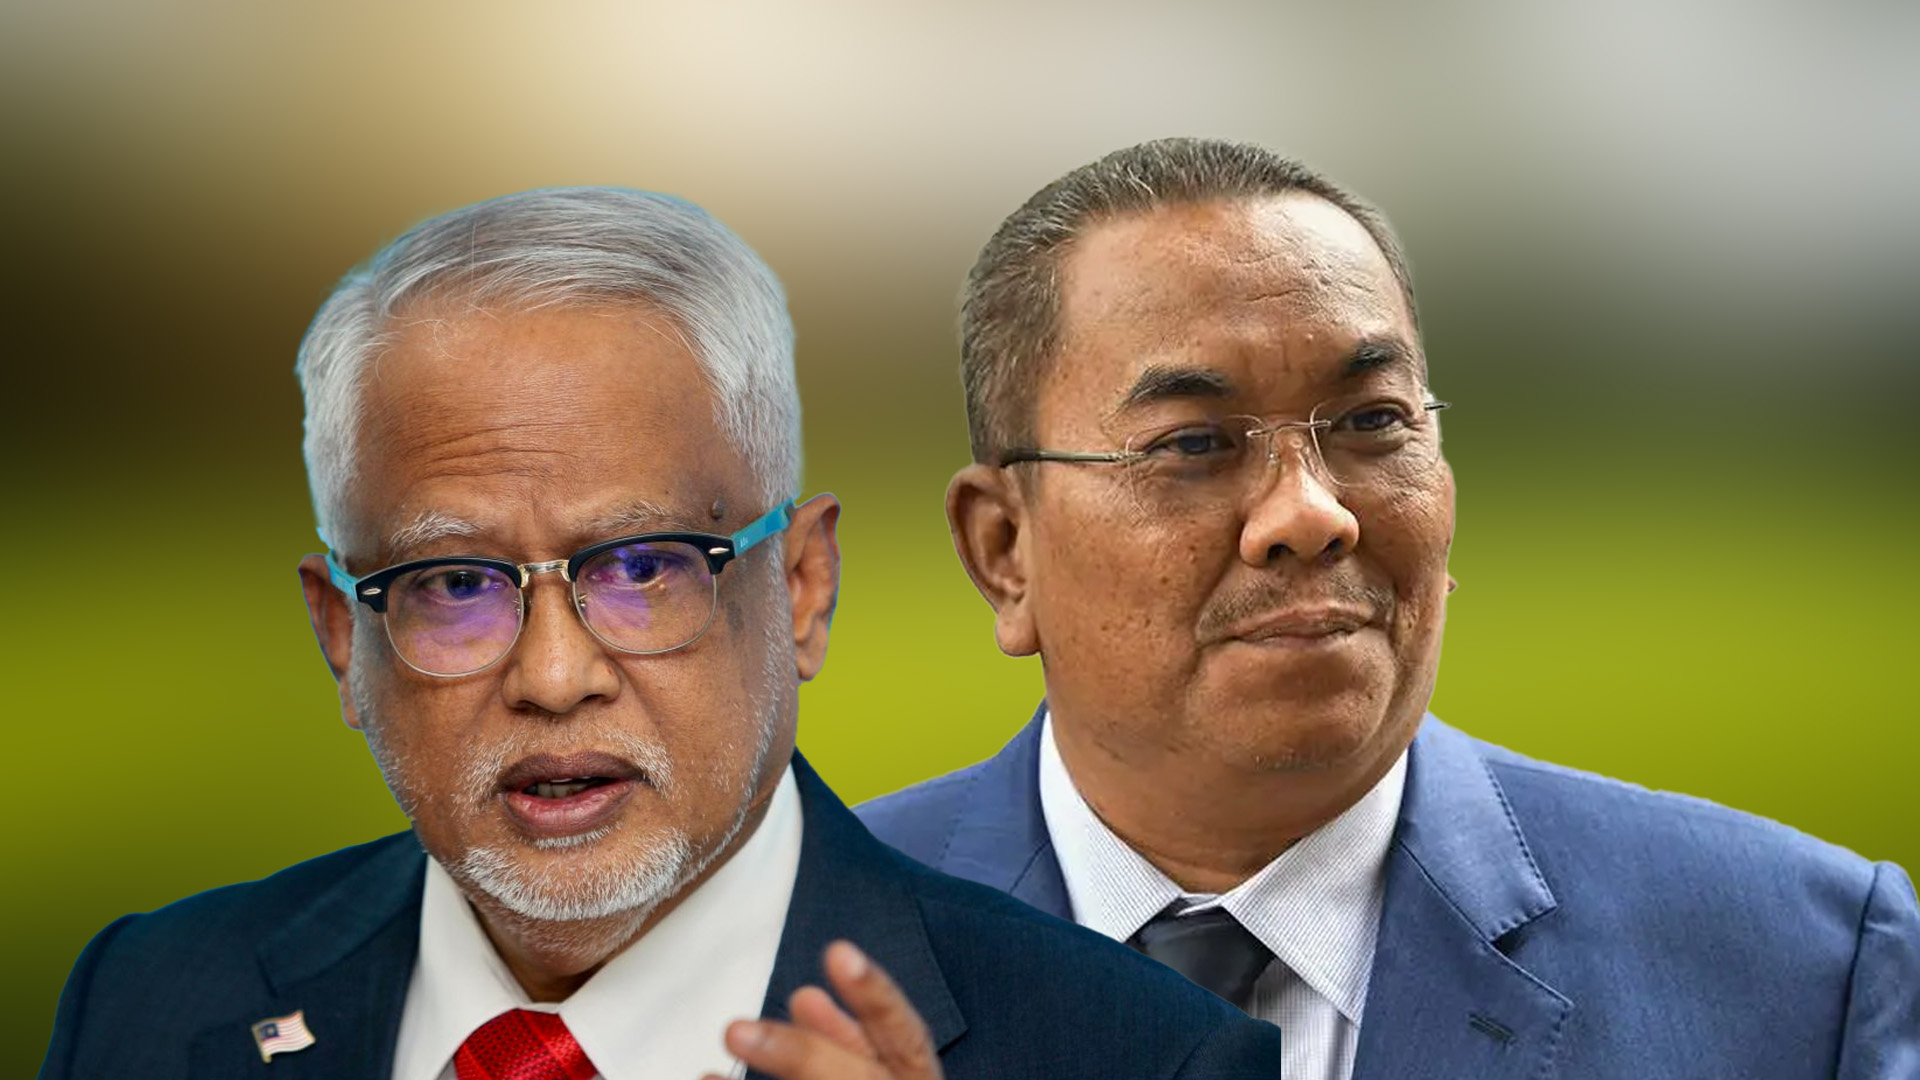 Mahfuz loses in Sanusi's Vellfire defamation suit, told to pay RM280,000